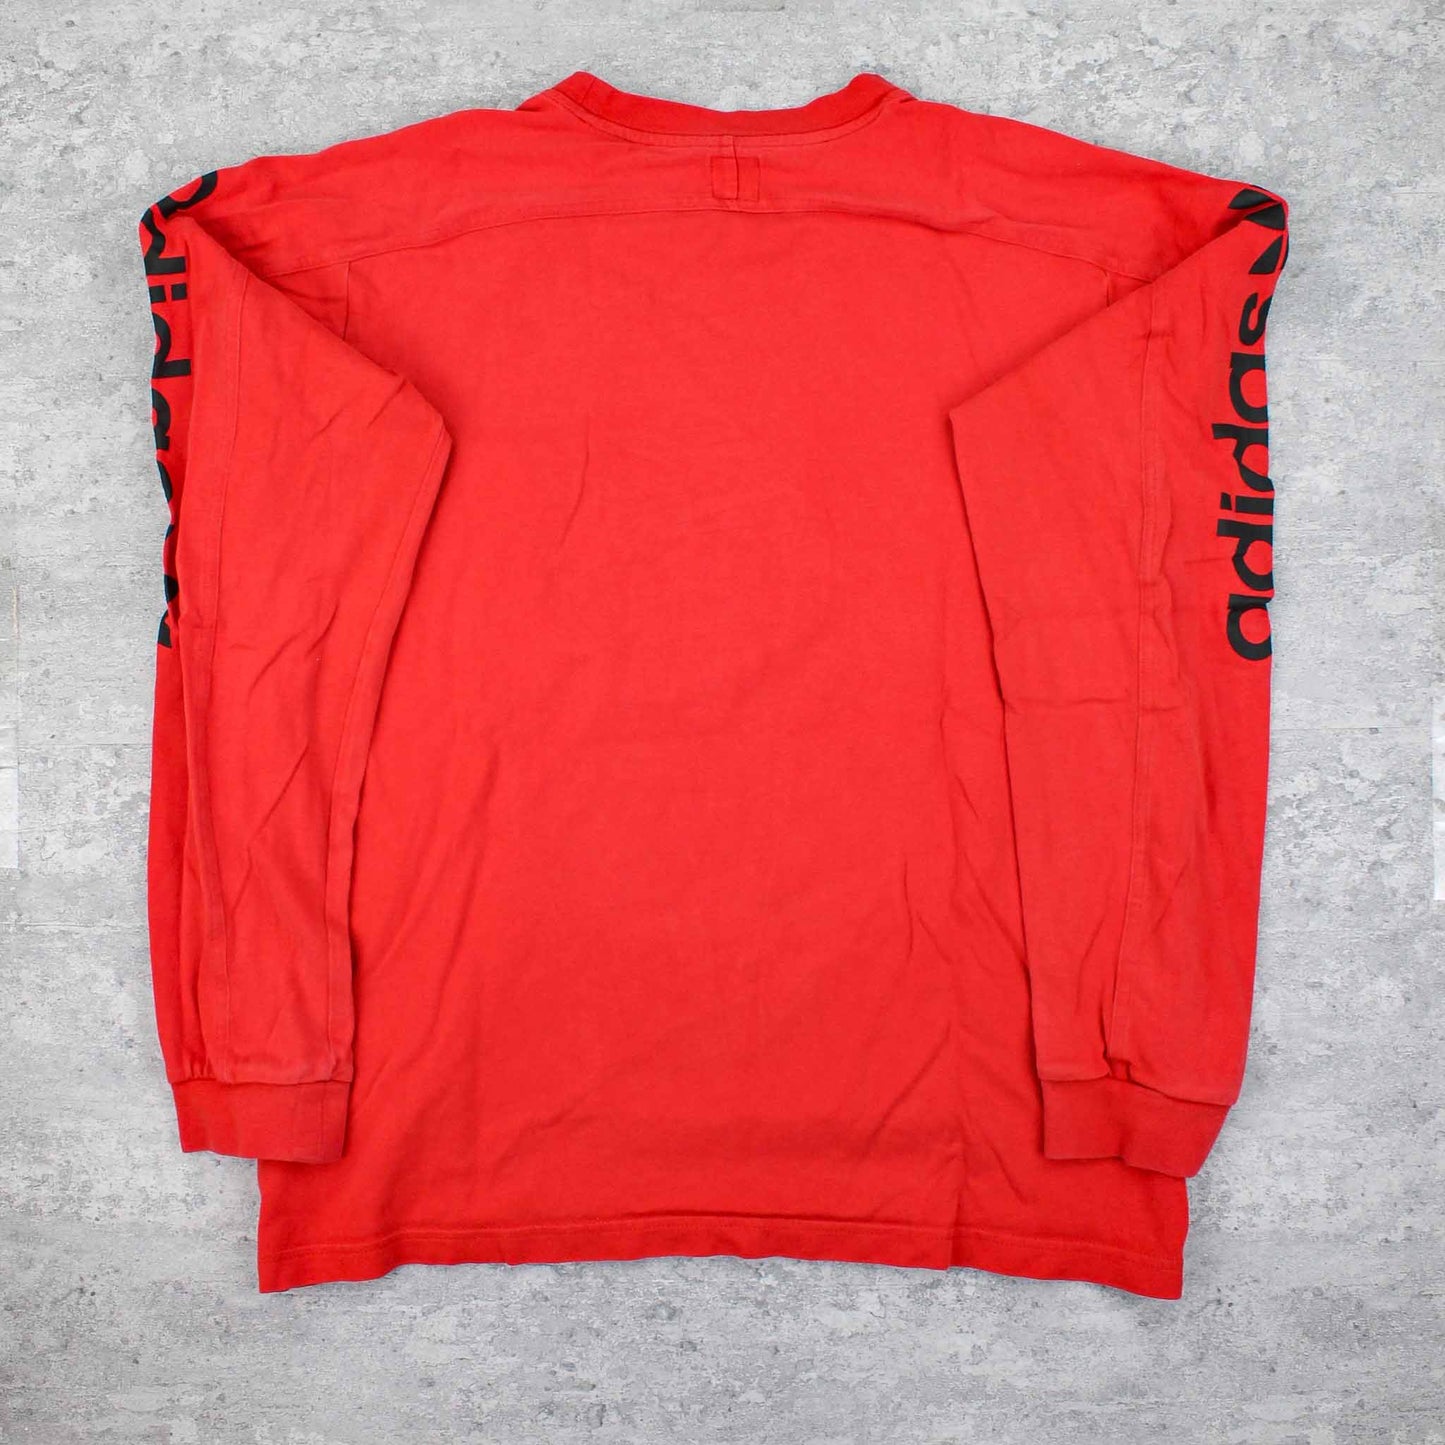 Vintage Adidas Spellout Sweater Rot - L